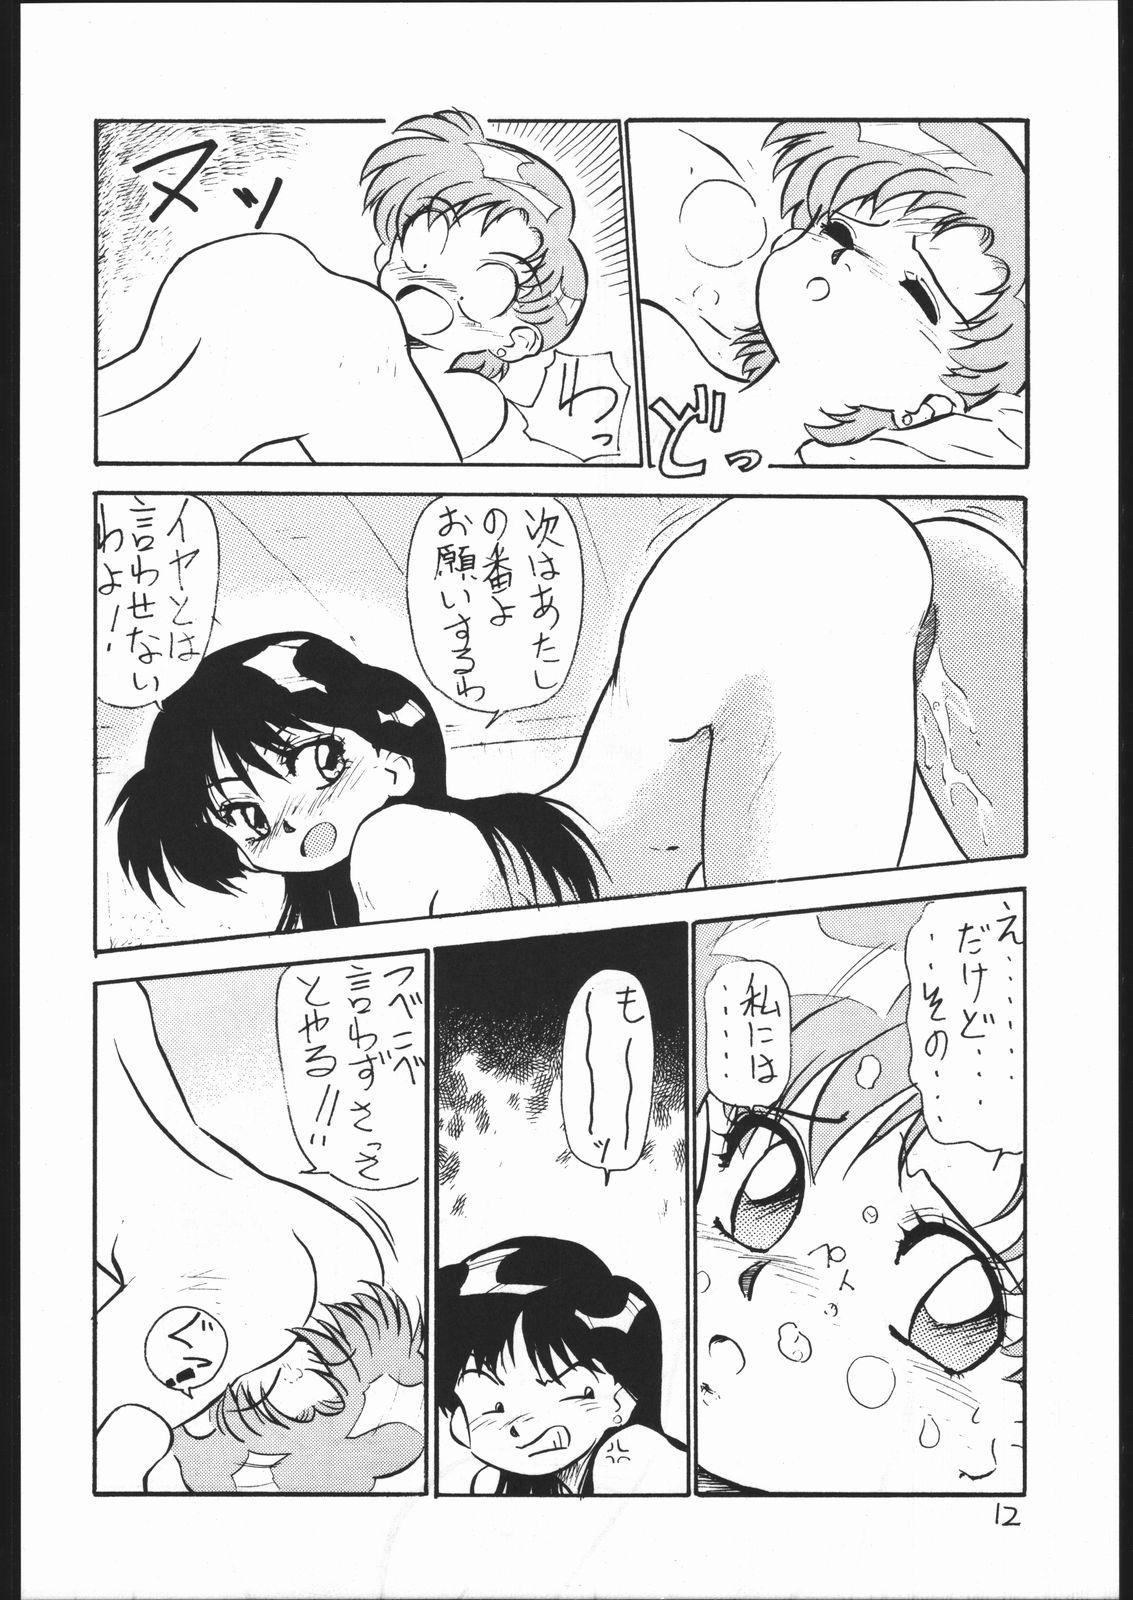 Roleplay V・H・S・M Vol. 1 - Sailor moon Farting - Page 11